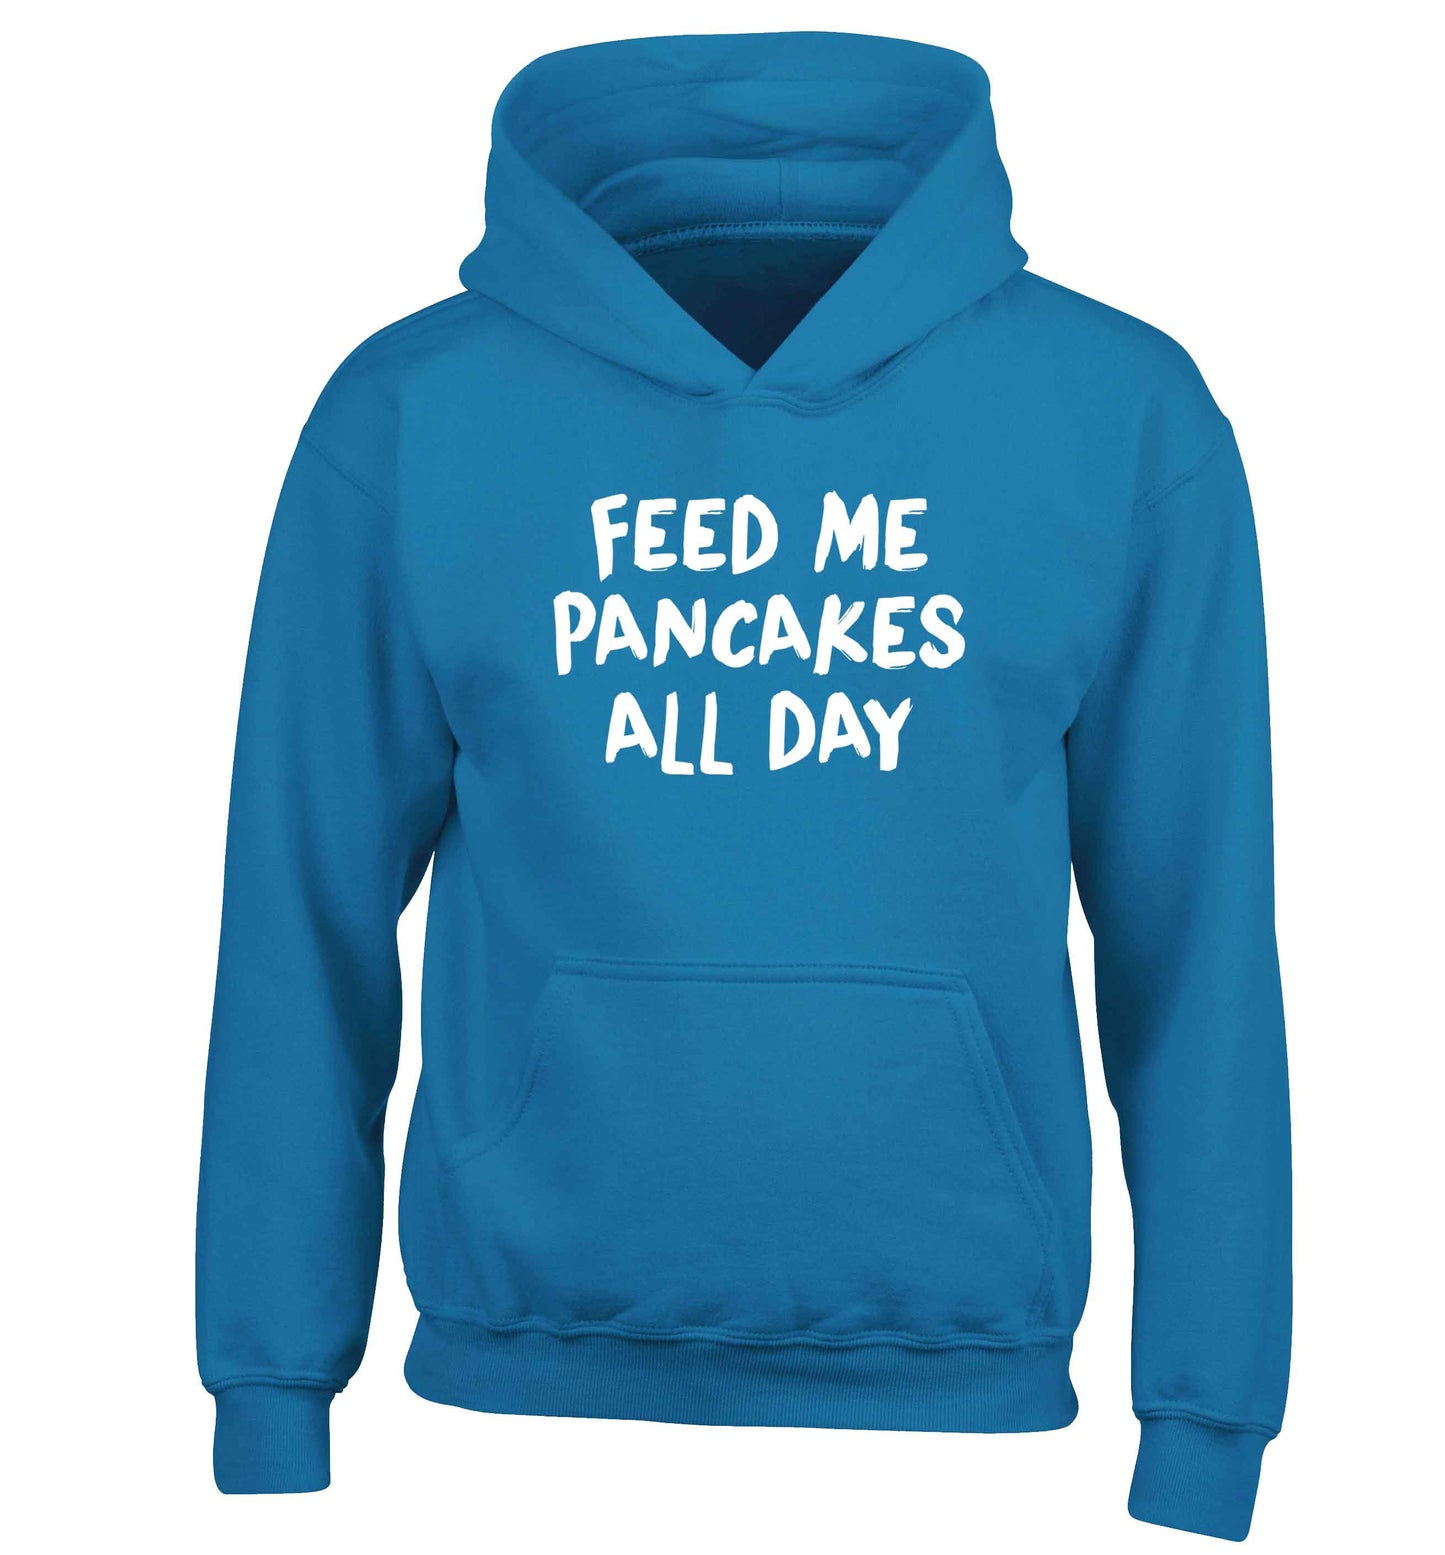 Feed me pancakes all day children's blue hoodie 12-13 Years